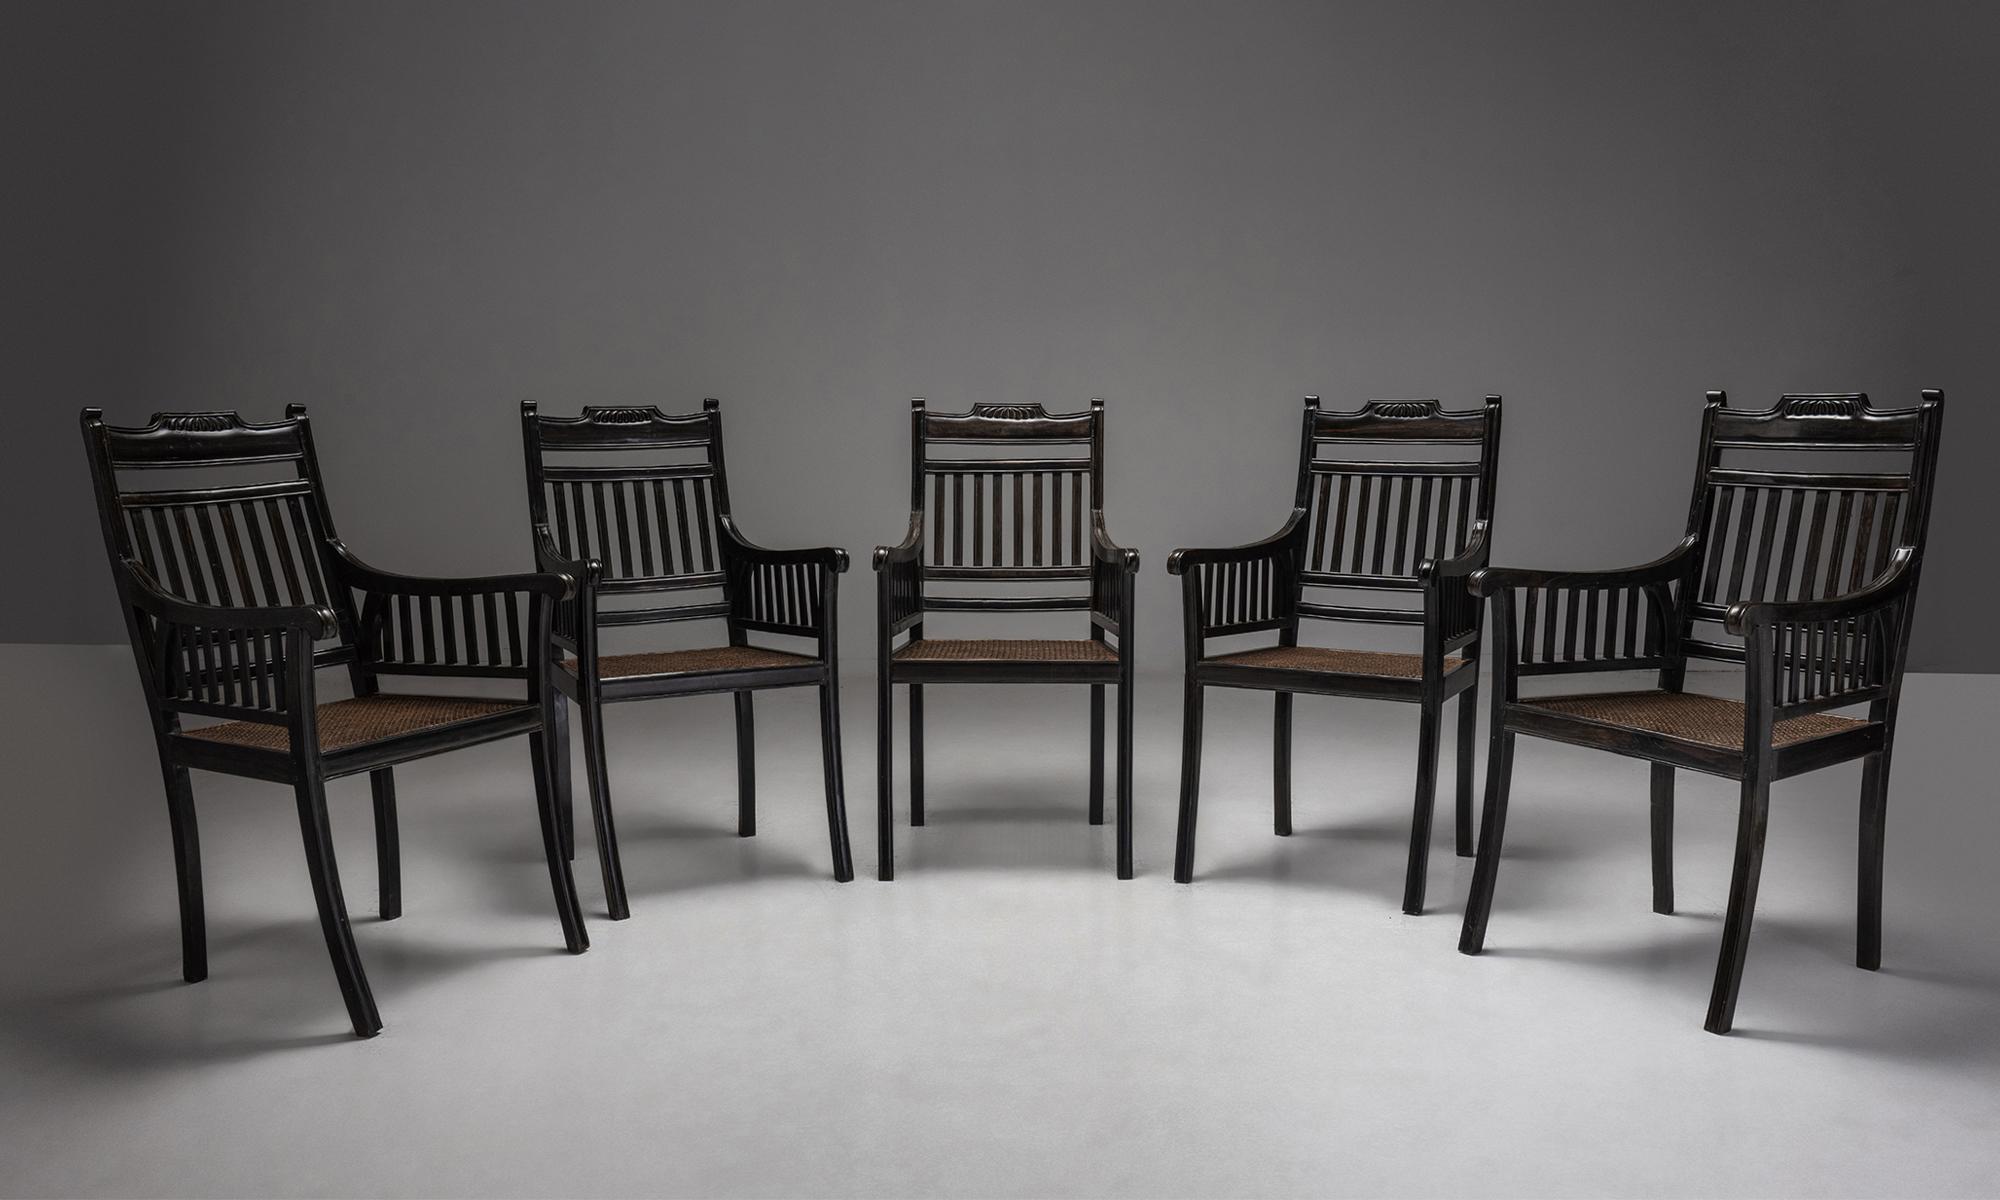 Set of (6) Ebony & Cane dining chairs

England 1940

Finely carved ebony framed with cane seats and out swept front legs.

Measures: 21.75” W x 24.25” D x 39.25” H.